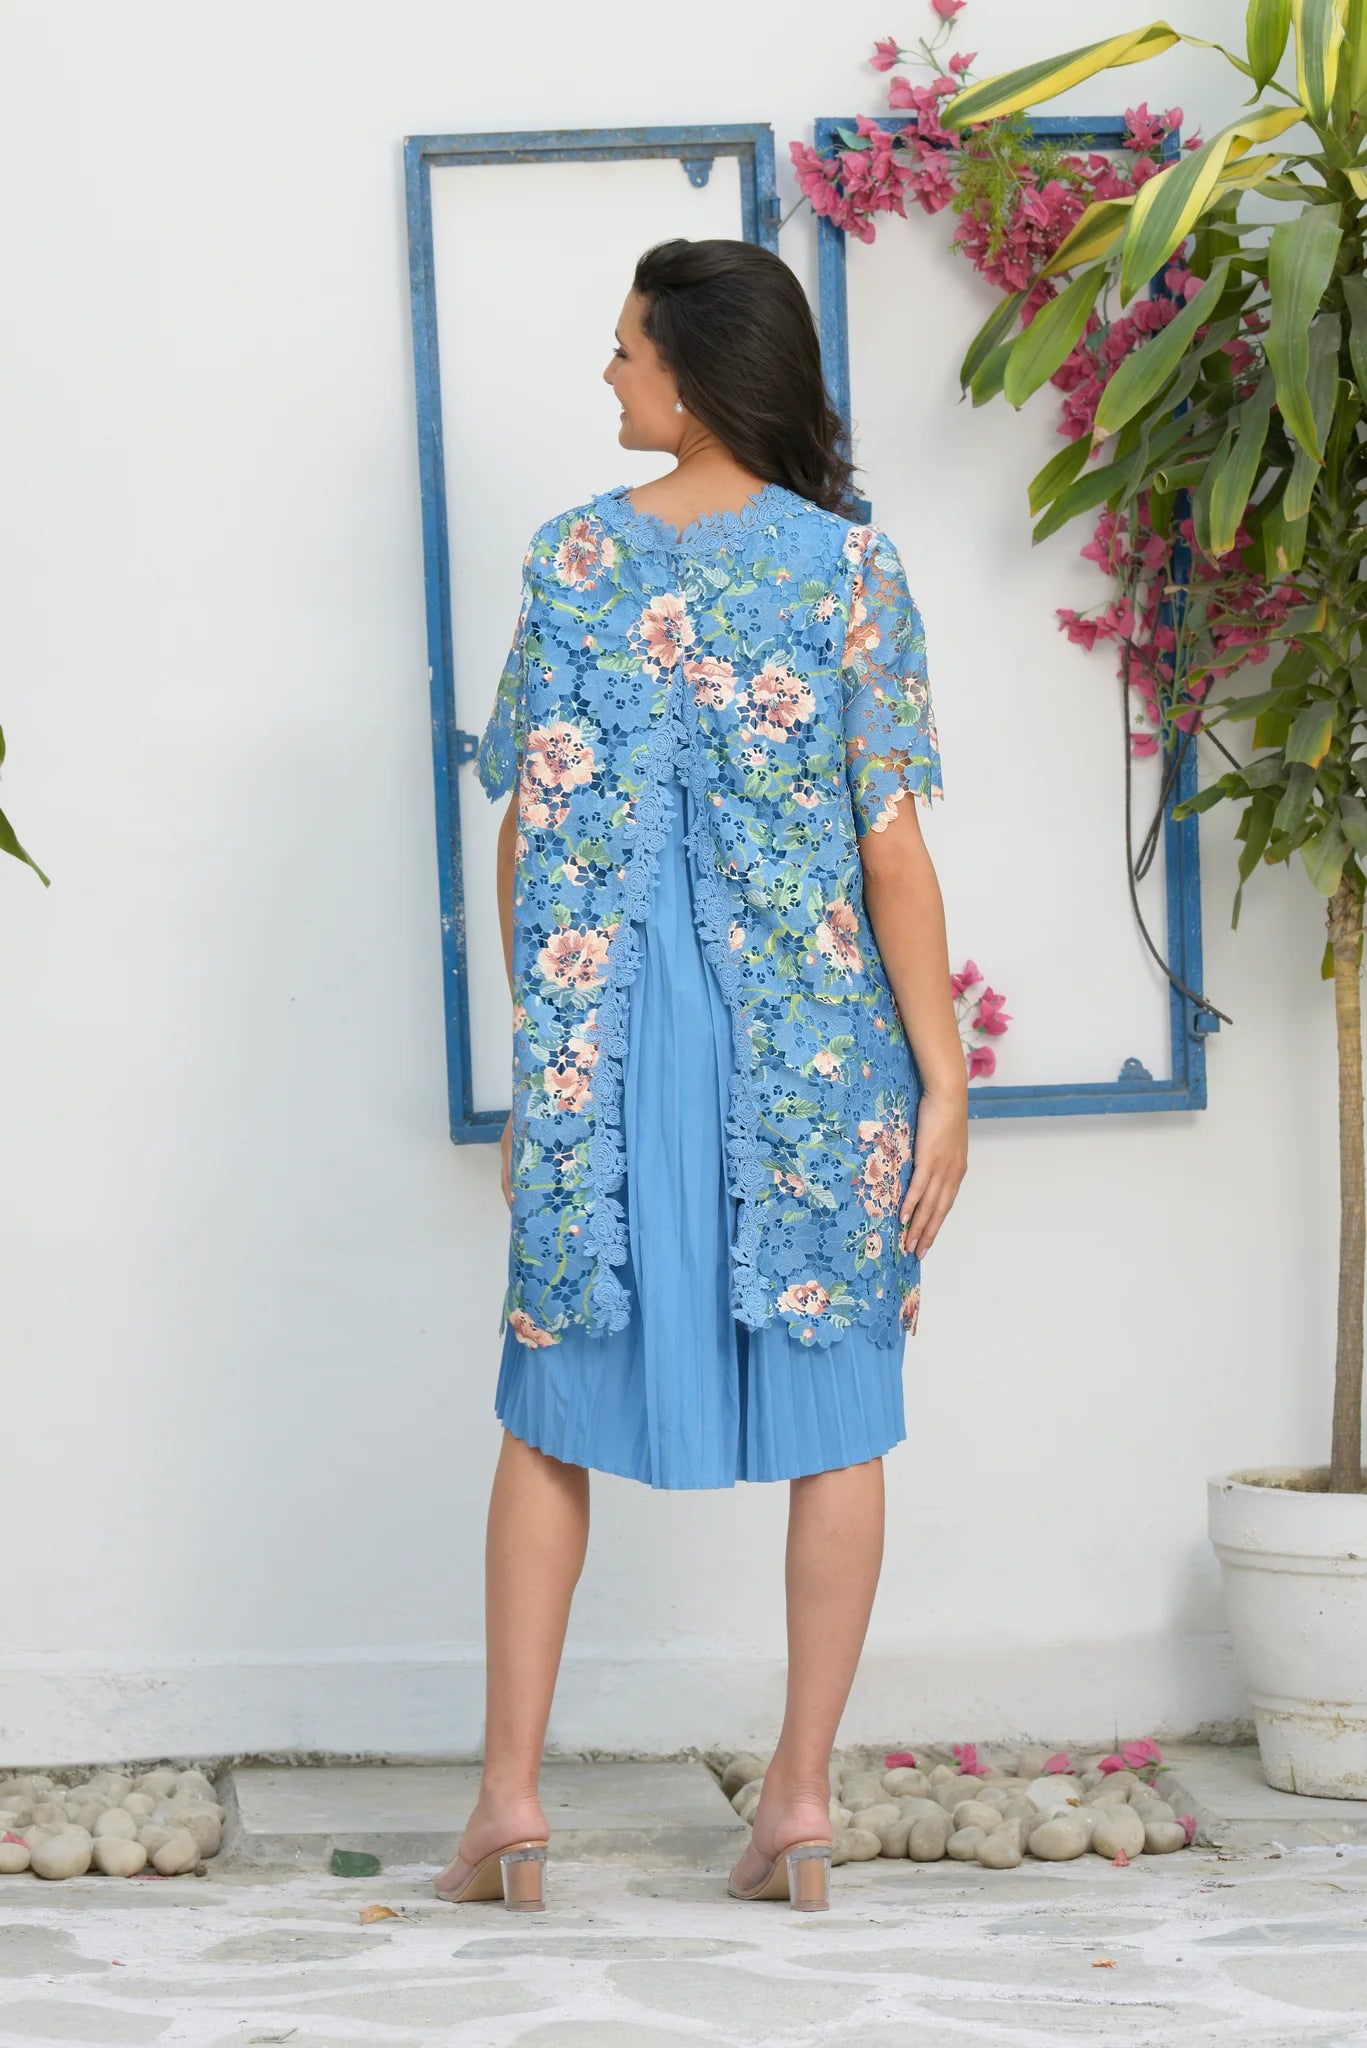 Image of The MYRA Mesh Buttercup Lace Dress offers timeless elegance with modern sophistication. Crafted from soft mesh with intricate embroidered detailing, this dress is sure to become a wardrobe staple. The ocean blue hue will add a splash of colour to any look. From savoirfashions.com